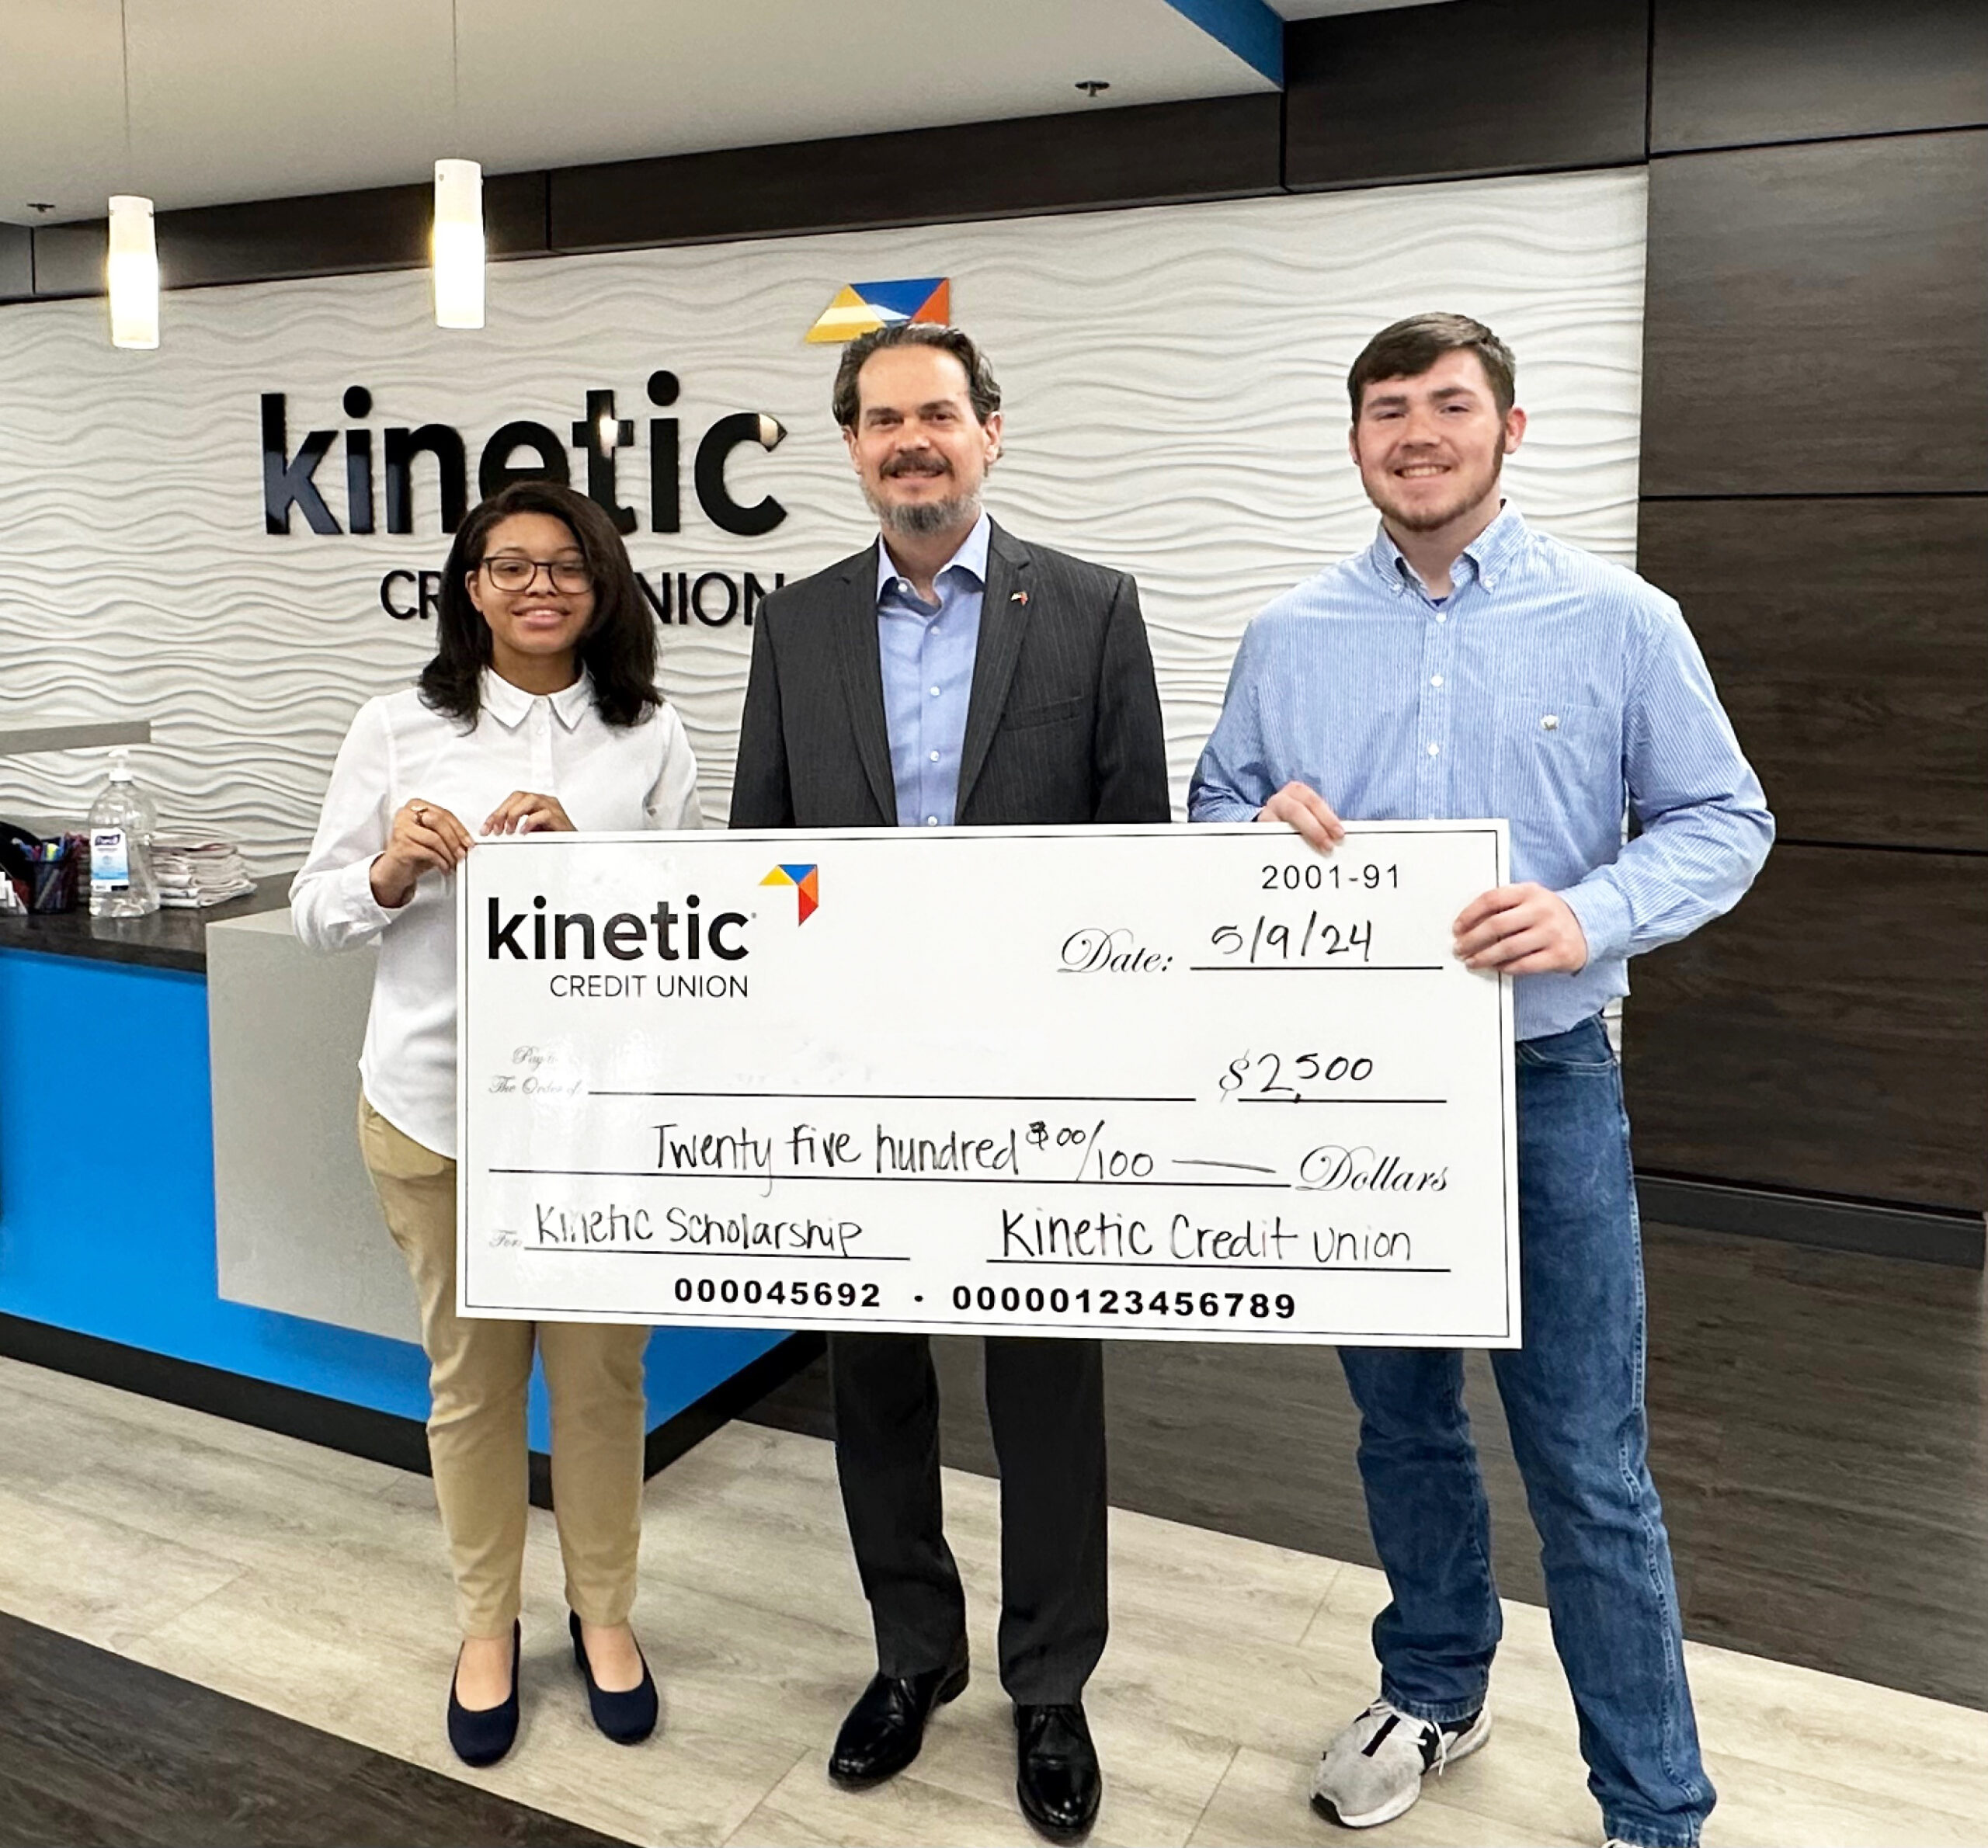 Kinetic Awards $5,000 in Annual College Scholarships to area Students